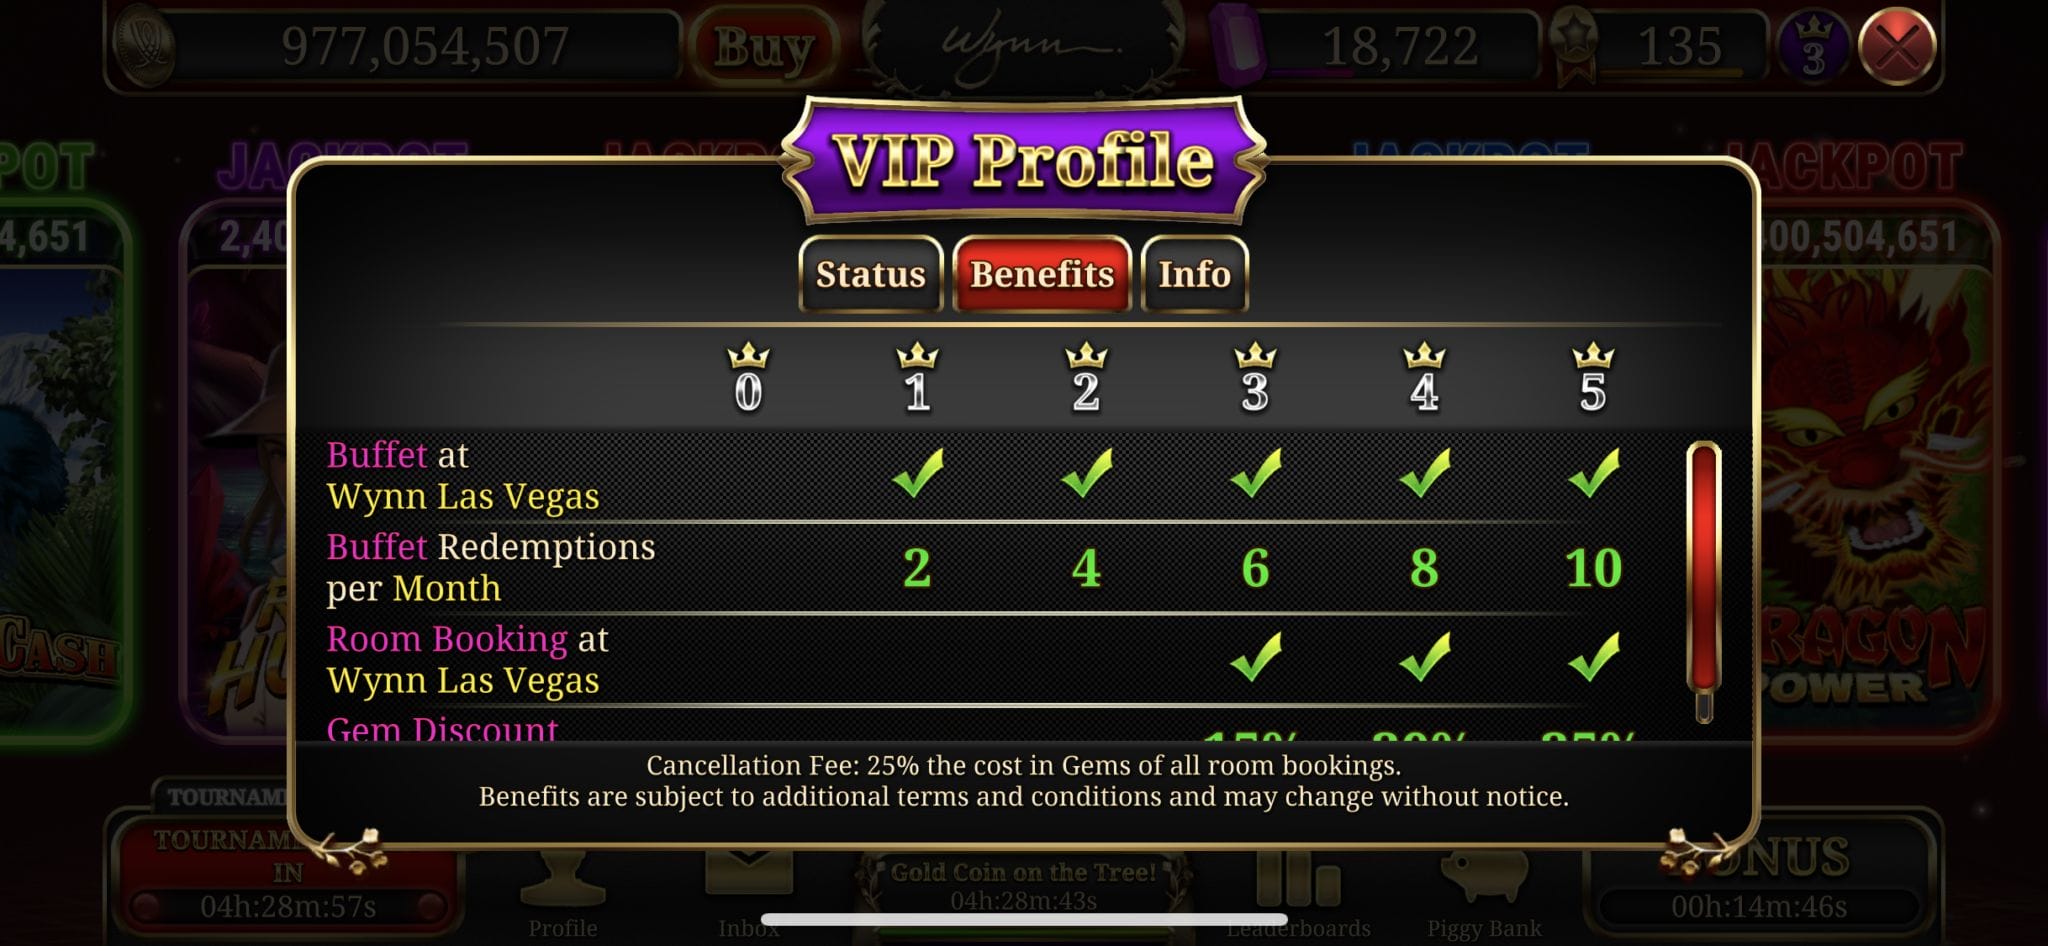 More Wynn Slots Changes Makes “Free” Rooms Impossible Know Your Slots